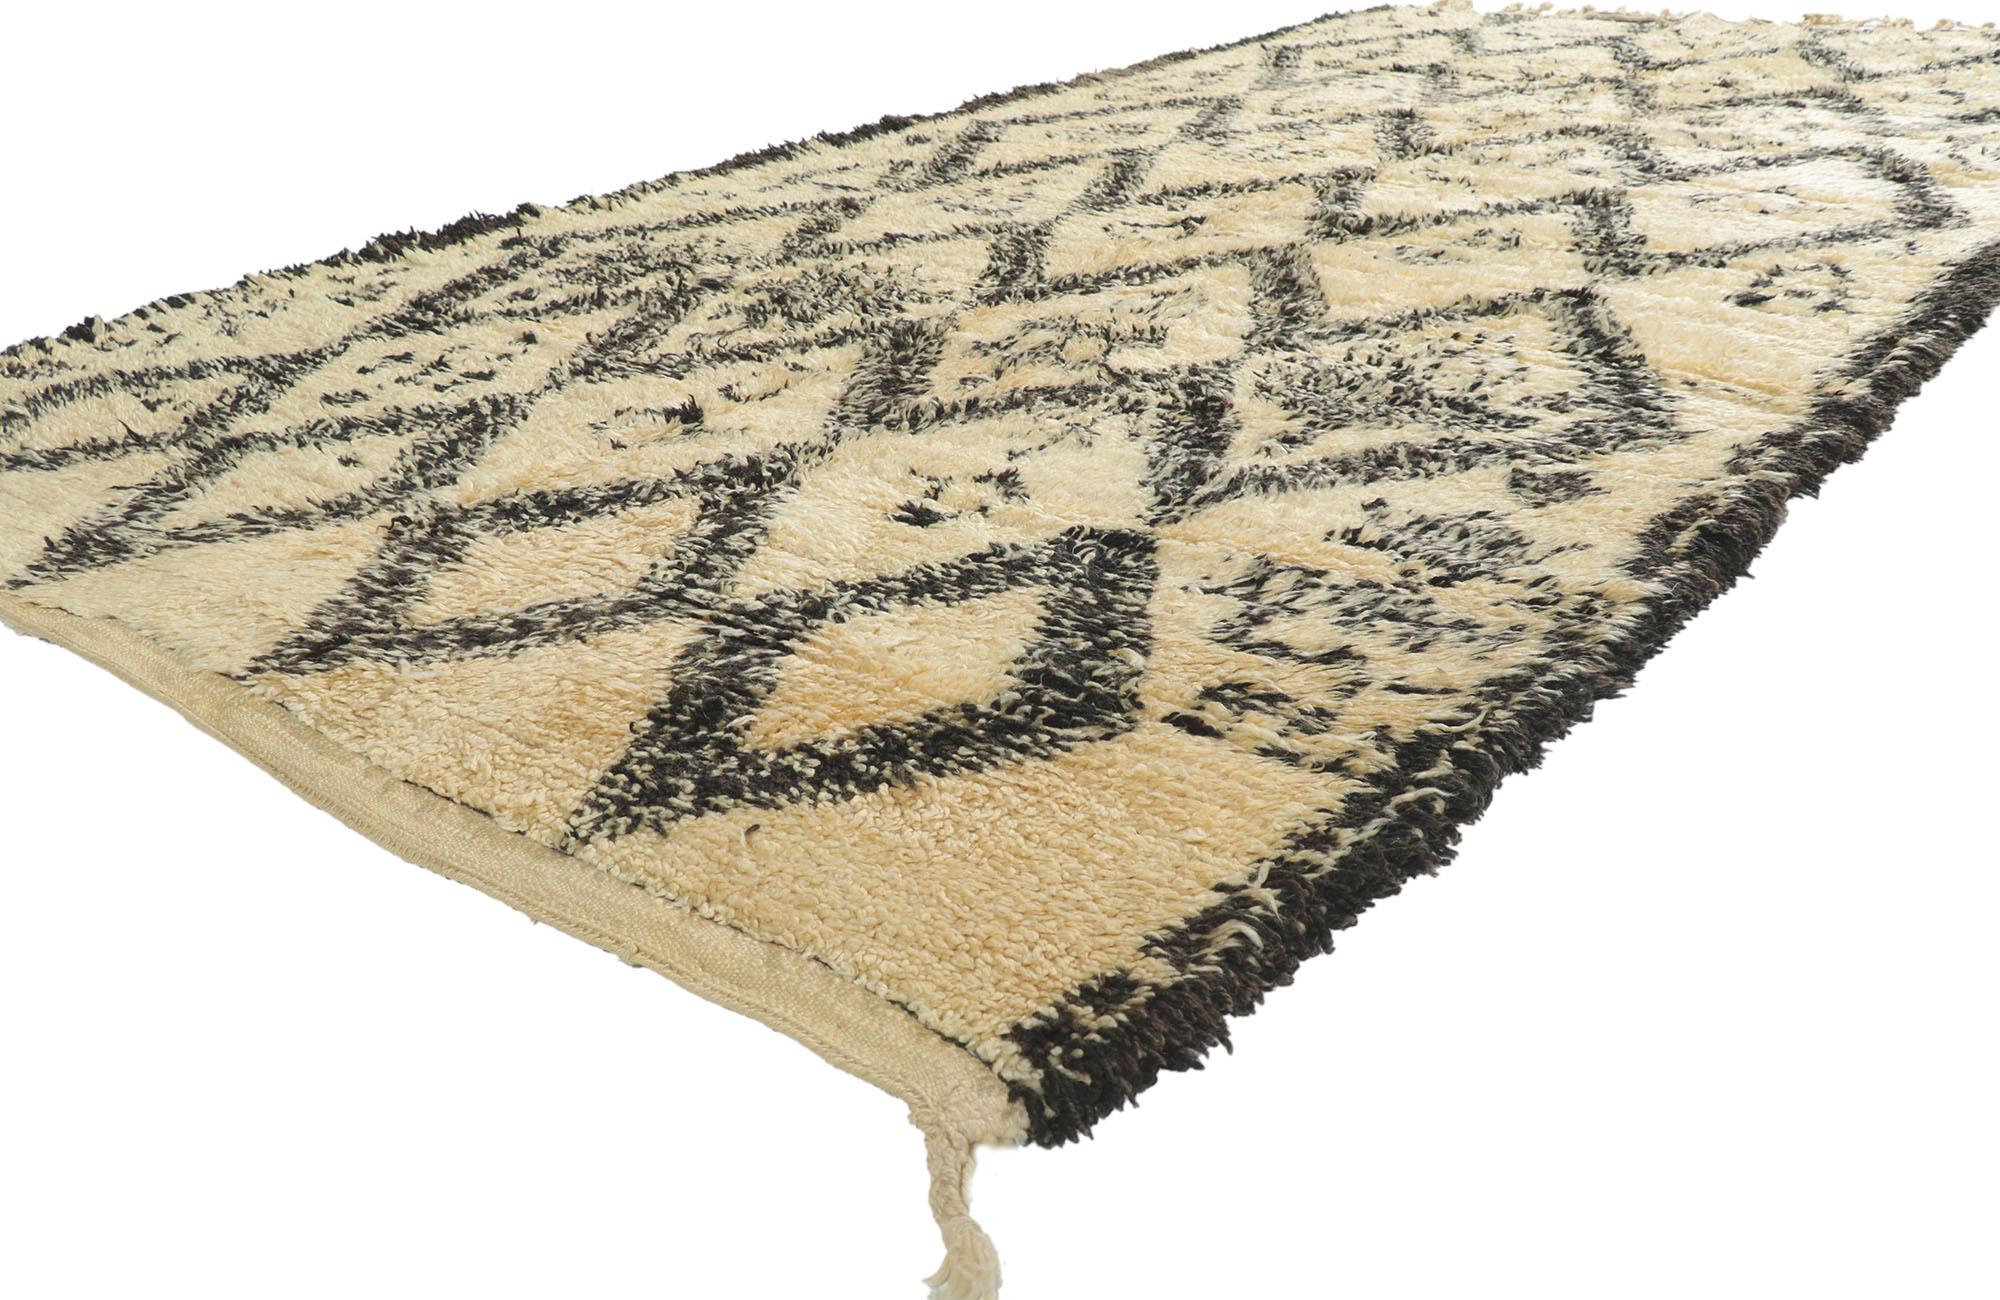 21357 Vintage Moroccan Beni Ourain Rug, 06'00 x 11'05. With its simplicity, plush pile and tribal style, this hand knotted wool vintage Berber Beni Ourain Moroccan rug is a captivating vision of woven beauty. It features a diamond lattice composed